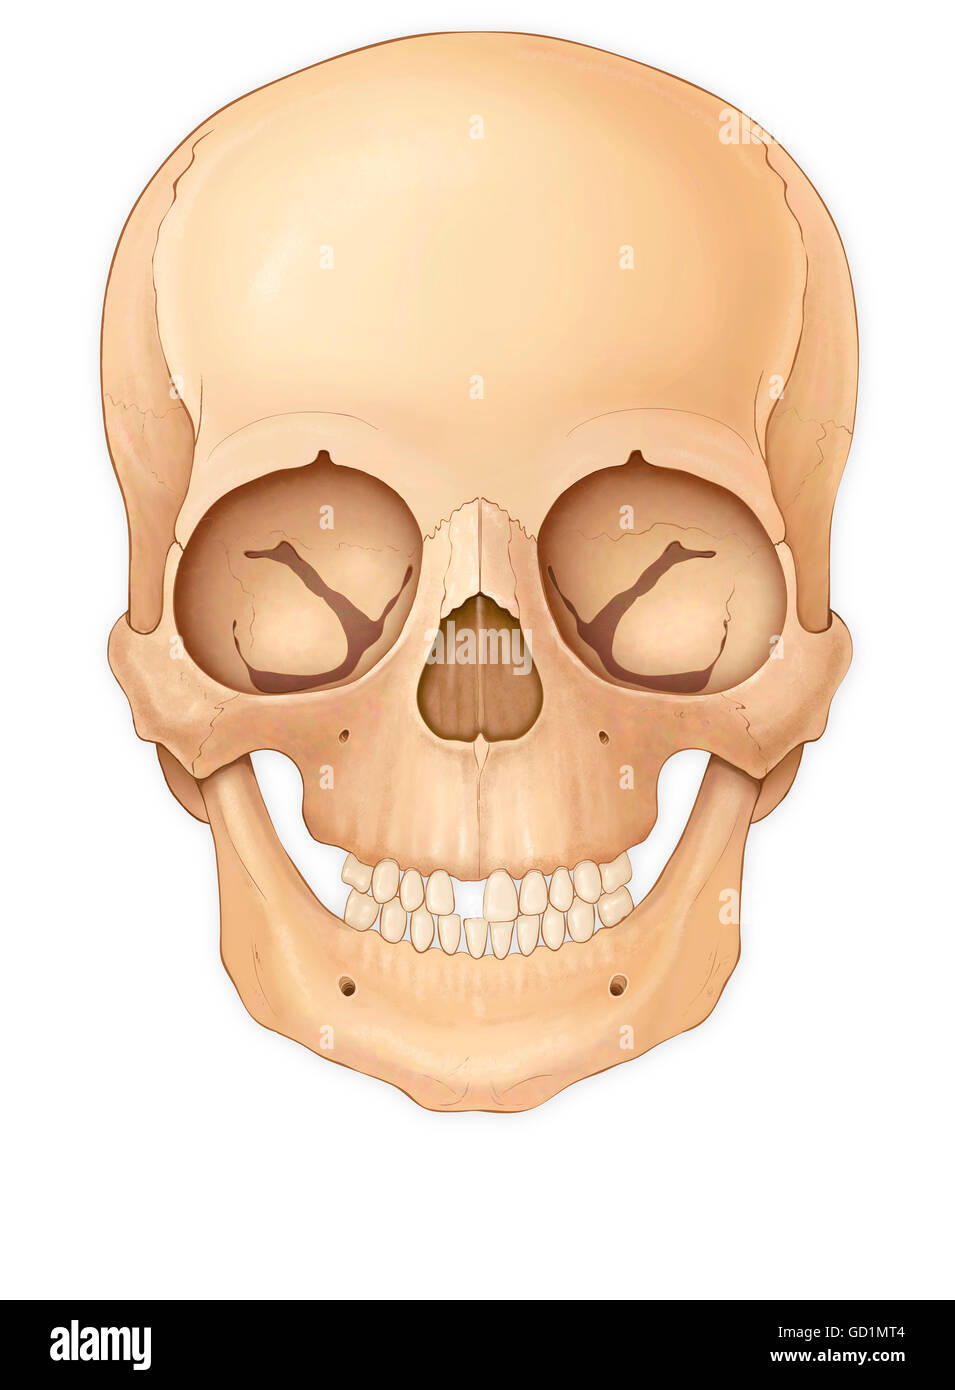 Normal front view of a child's skull Stock Photo